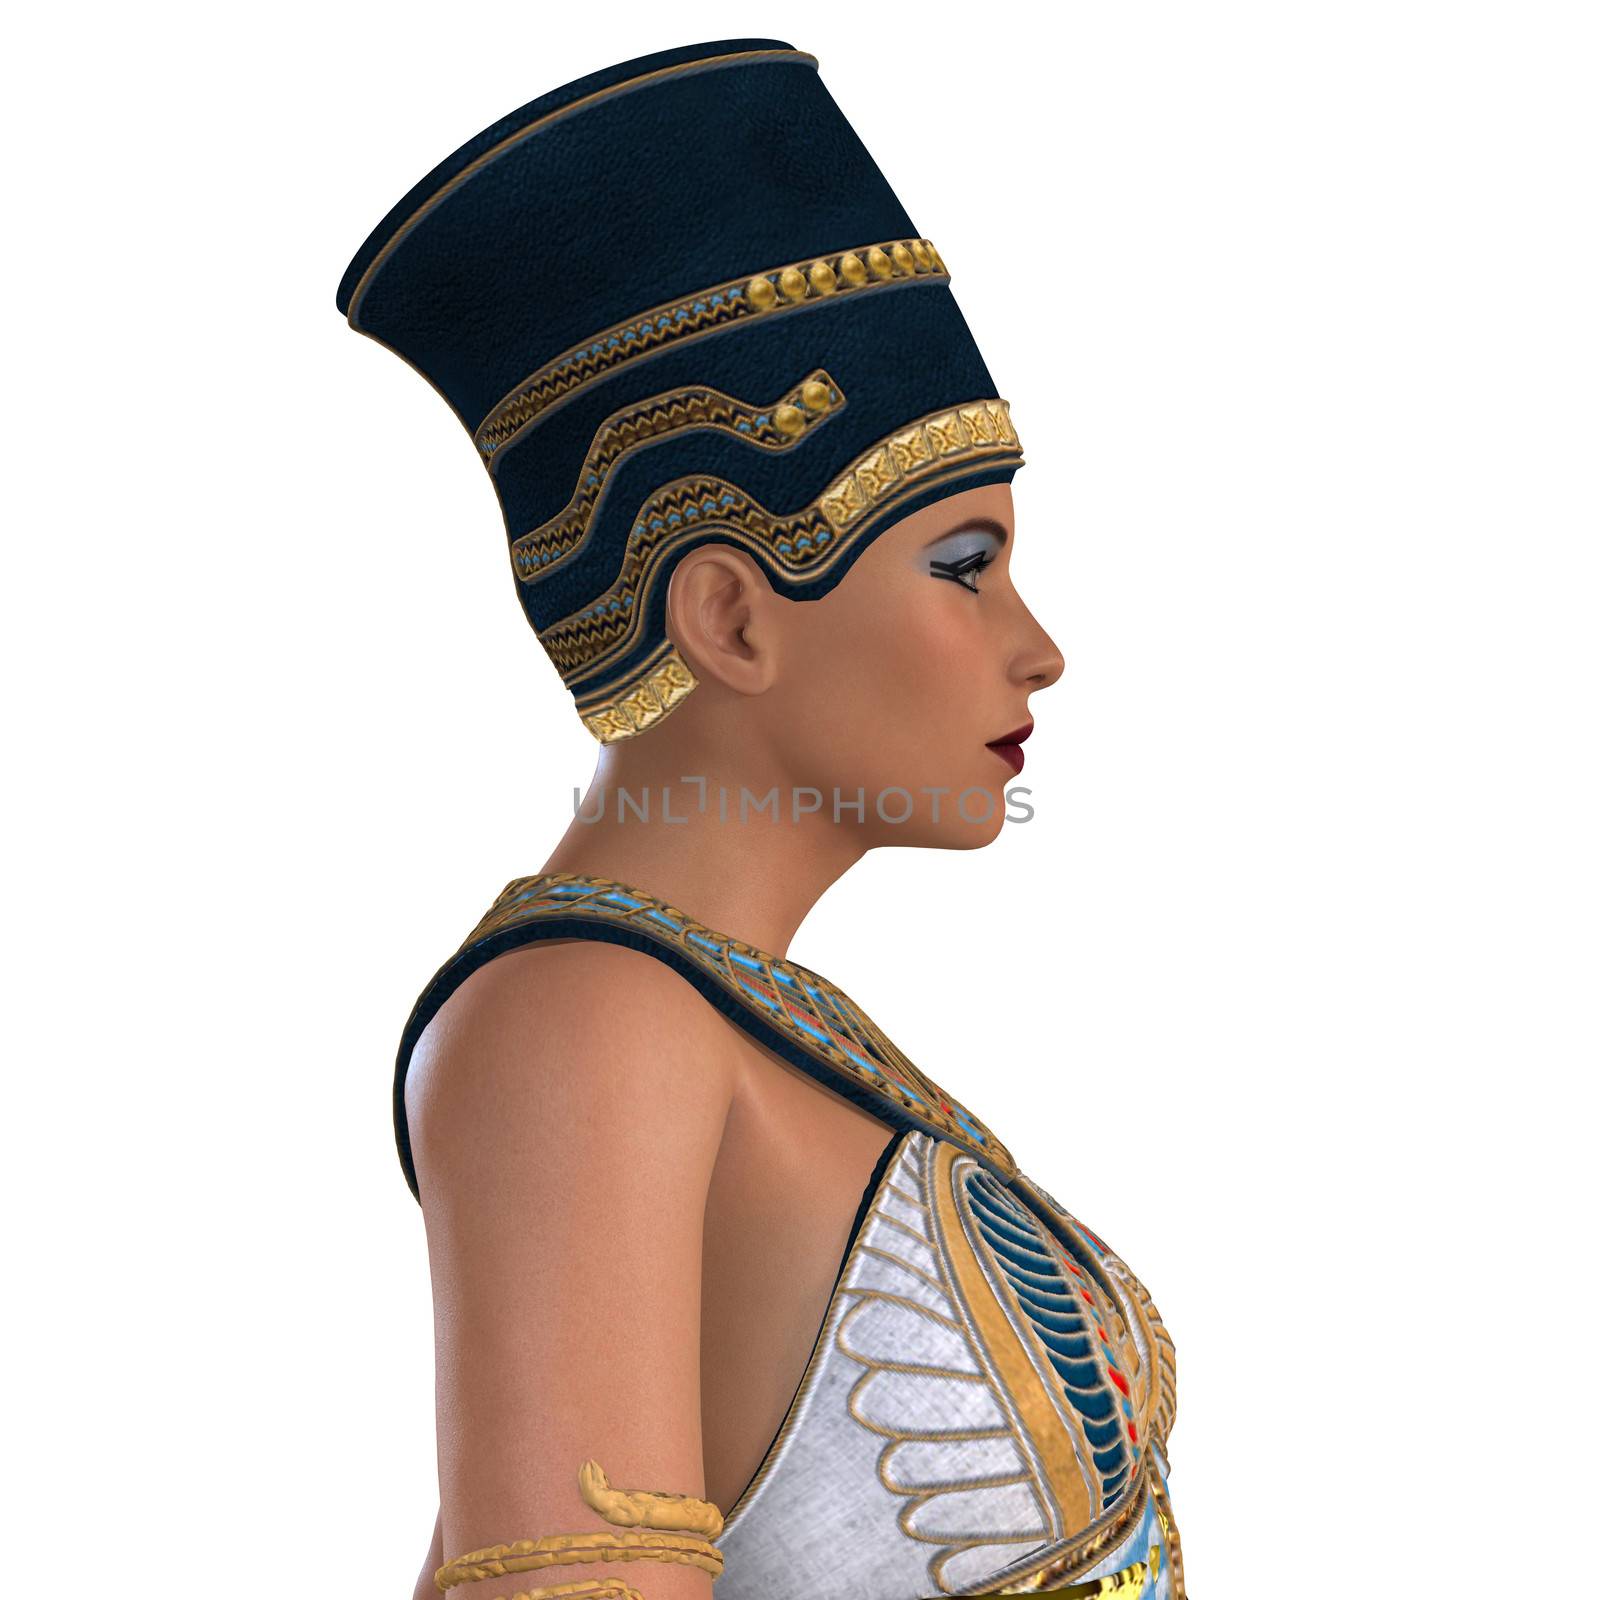 What Nefertiti, a queen of ancient Egypt, may have looked like in life.